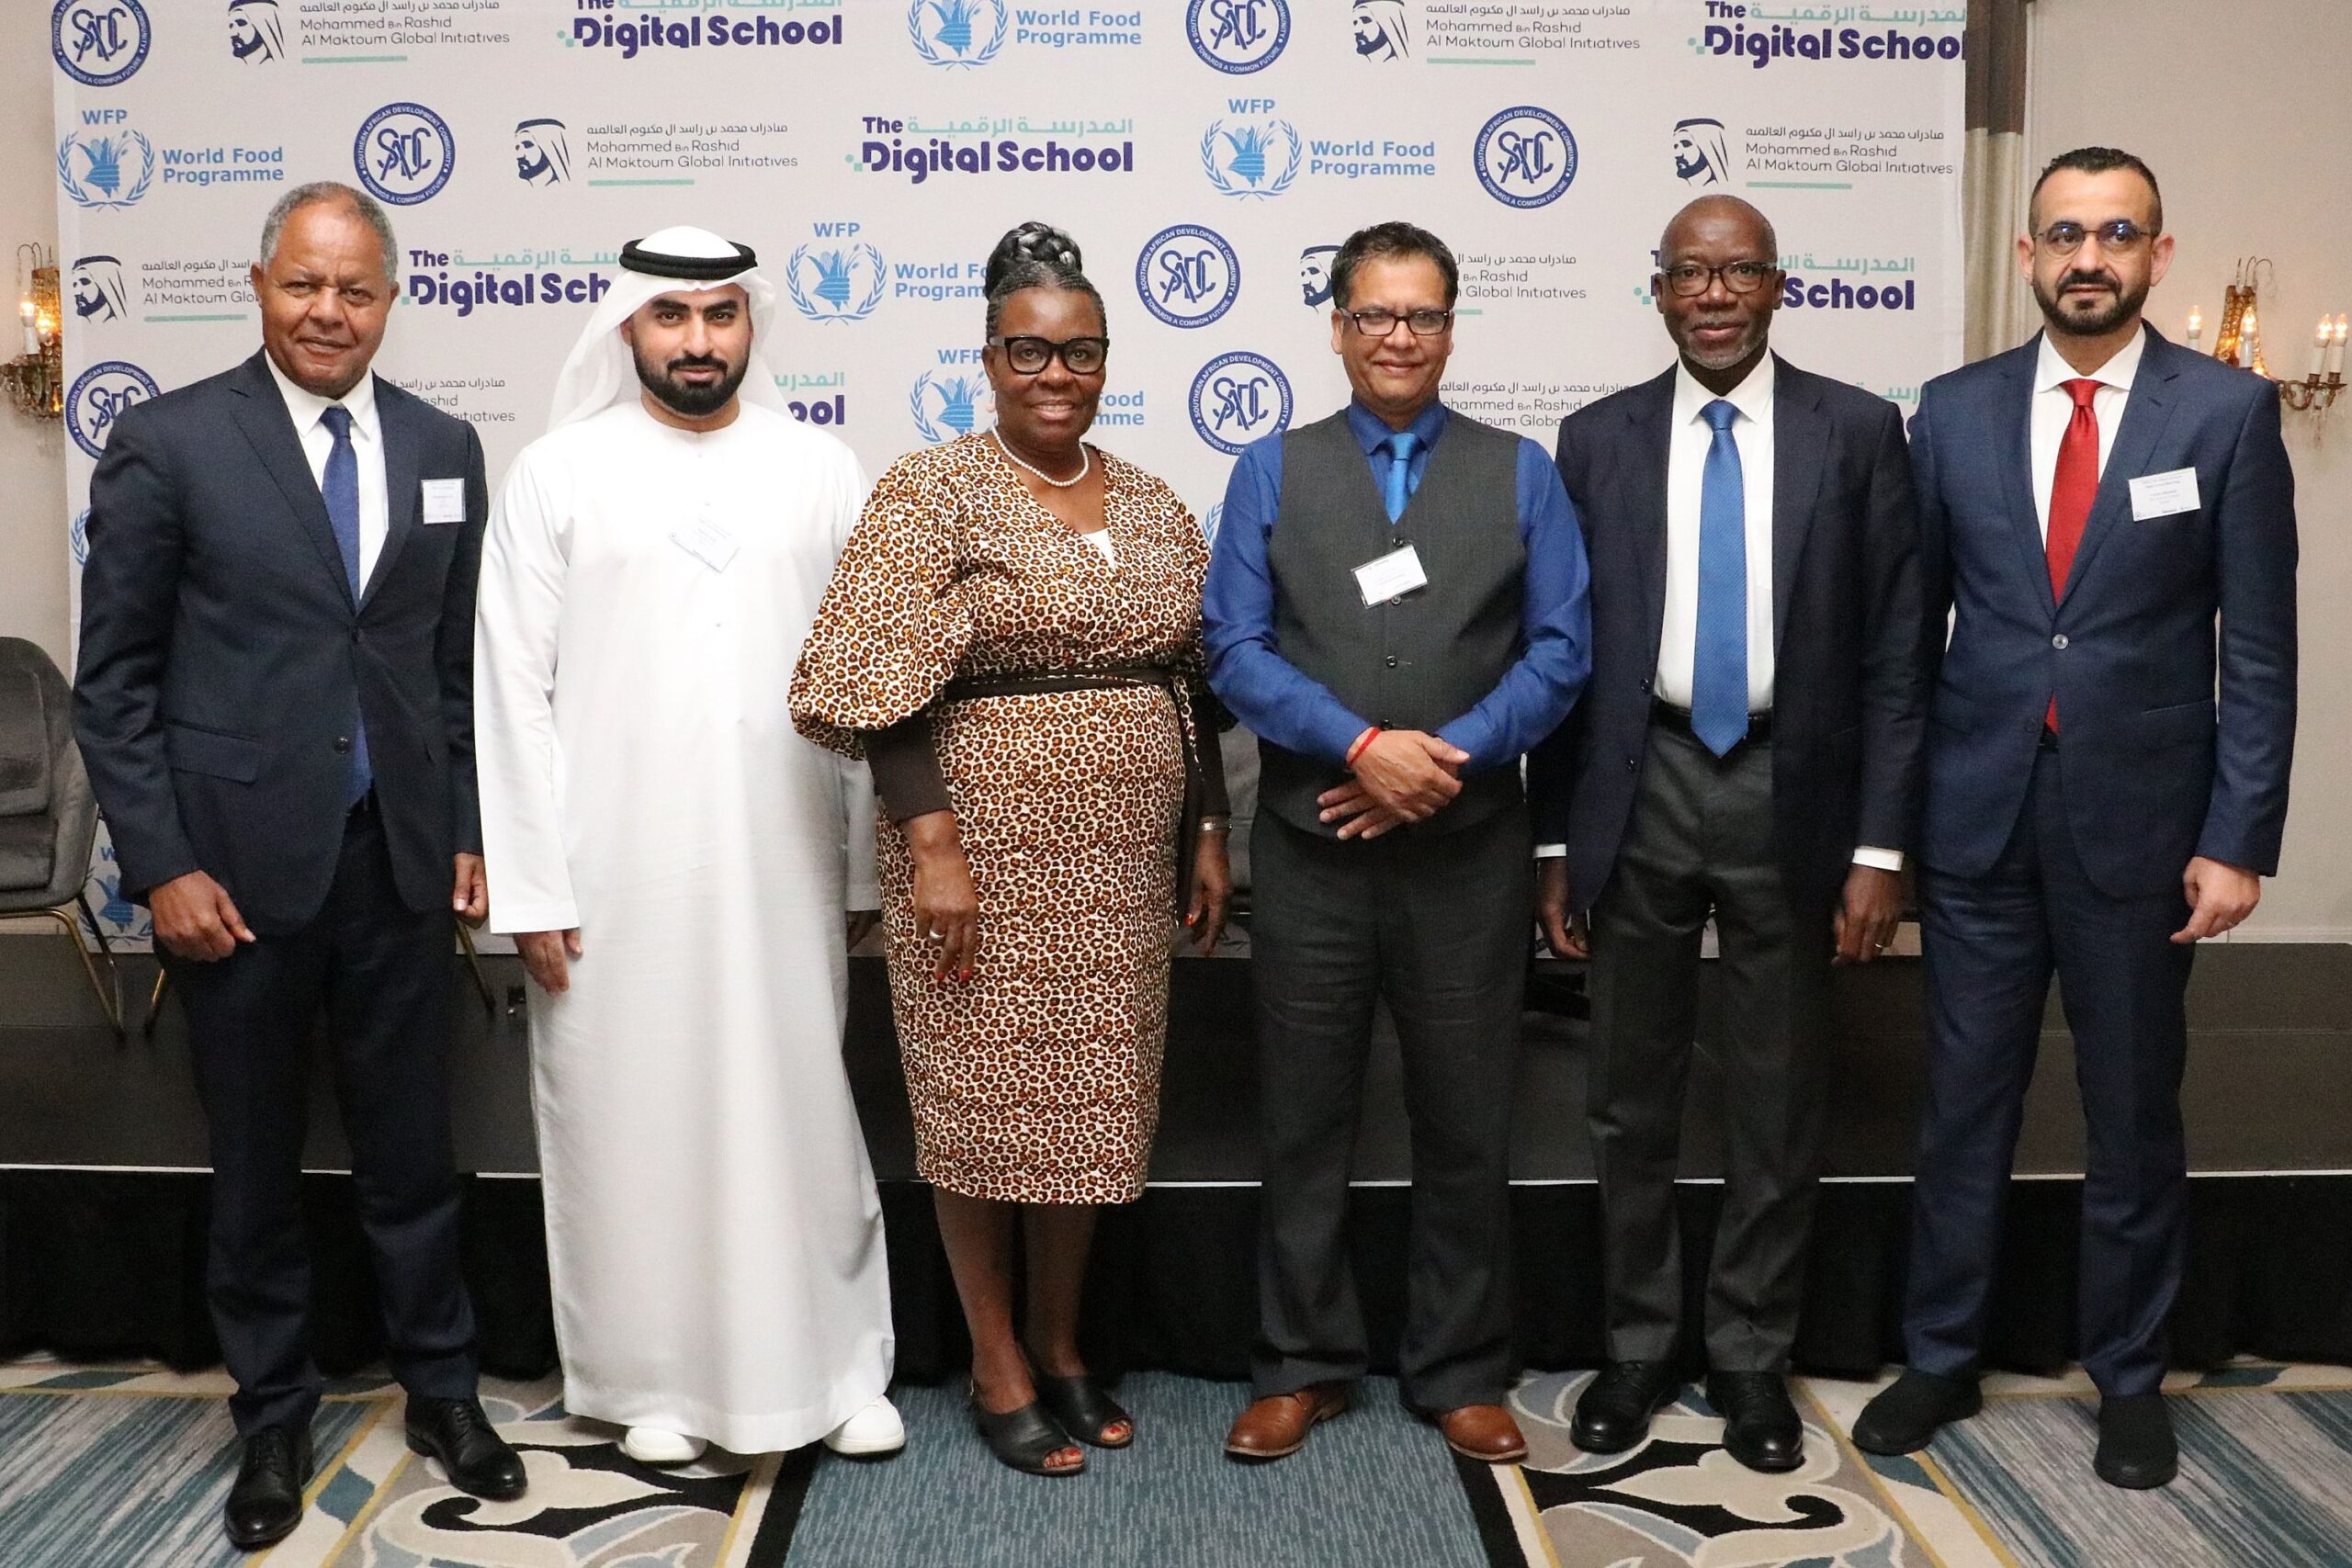 The digital school promotes digital transformation and future trends in education for southern African countries